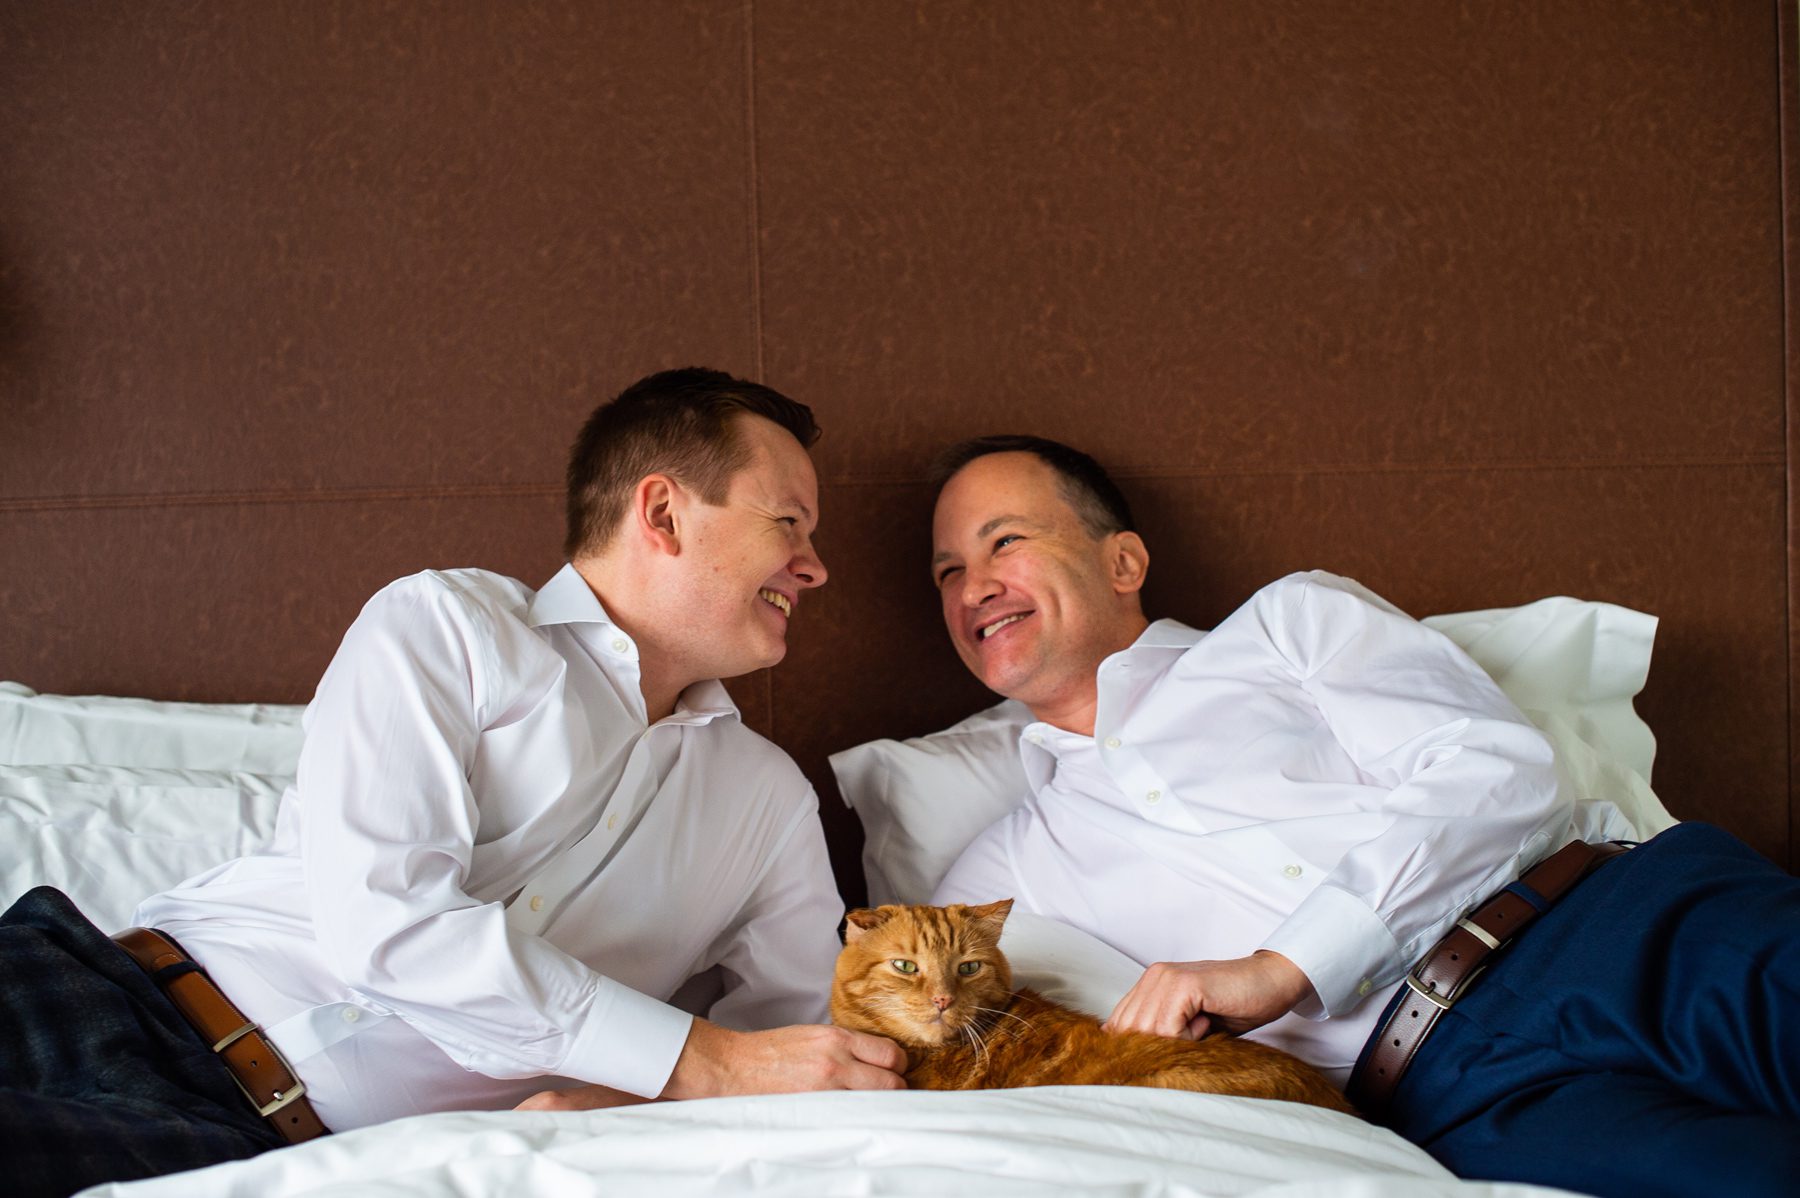 Wedding Portraits with Cats